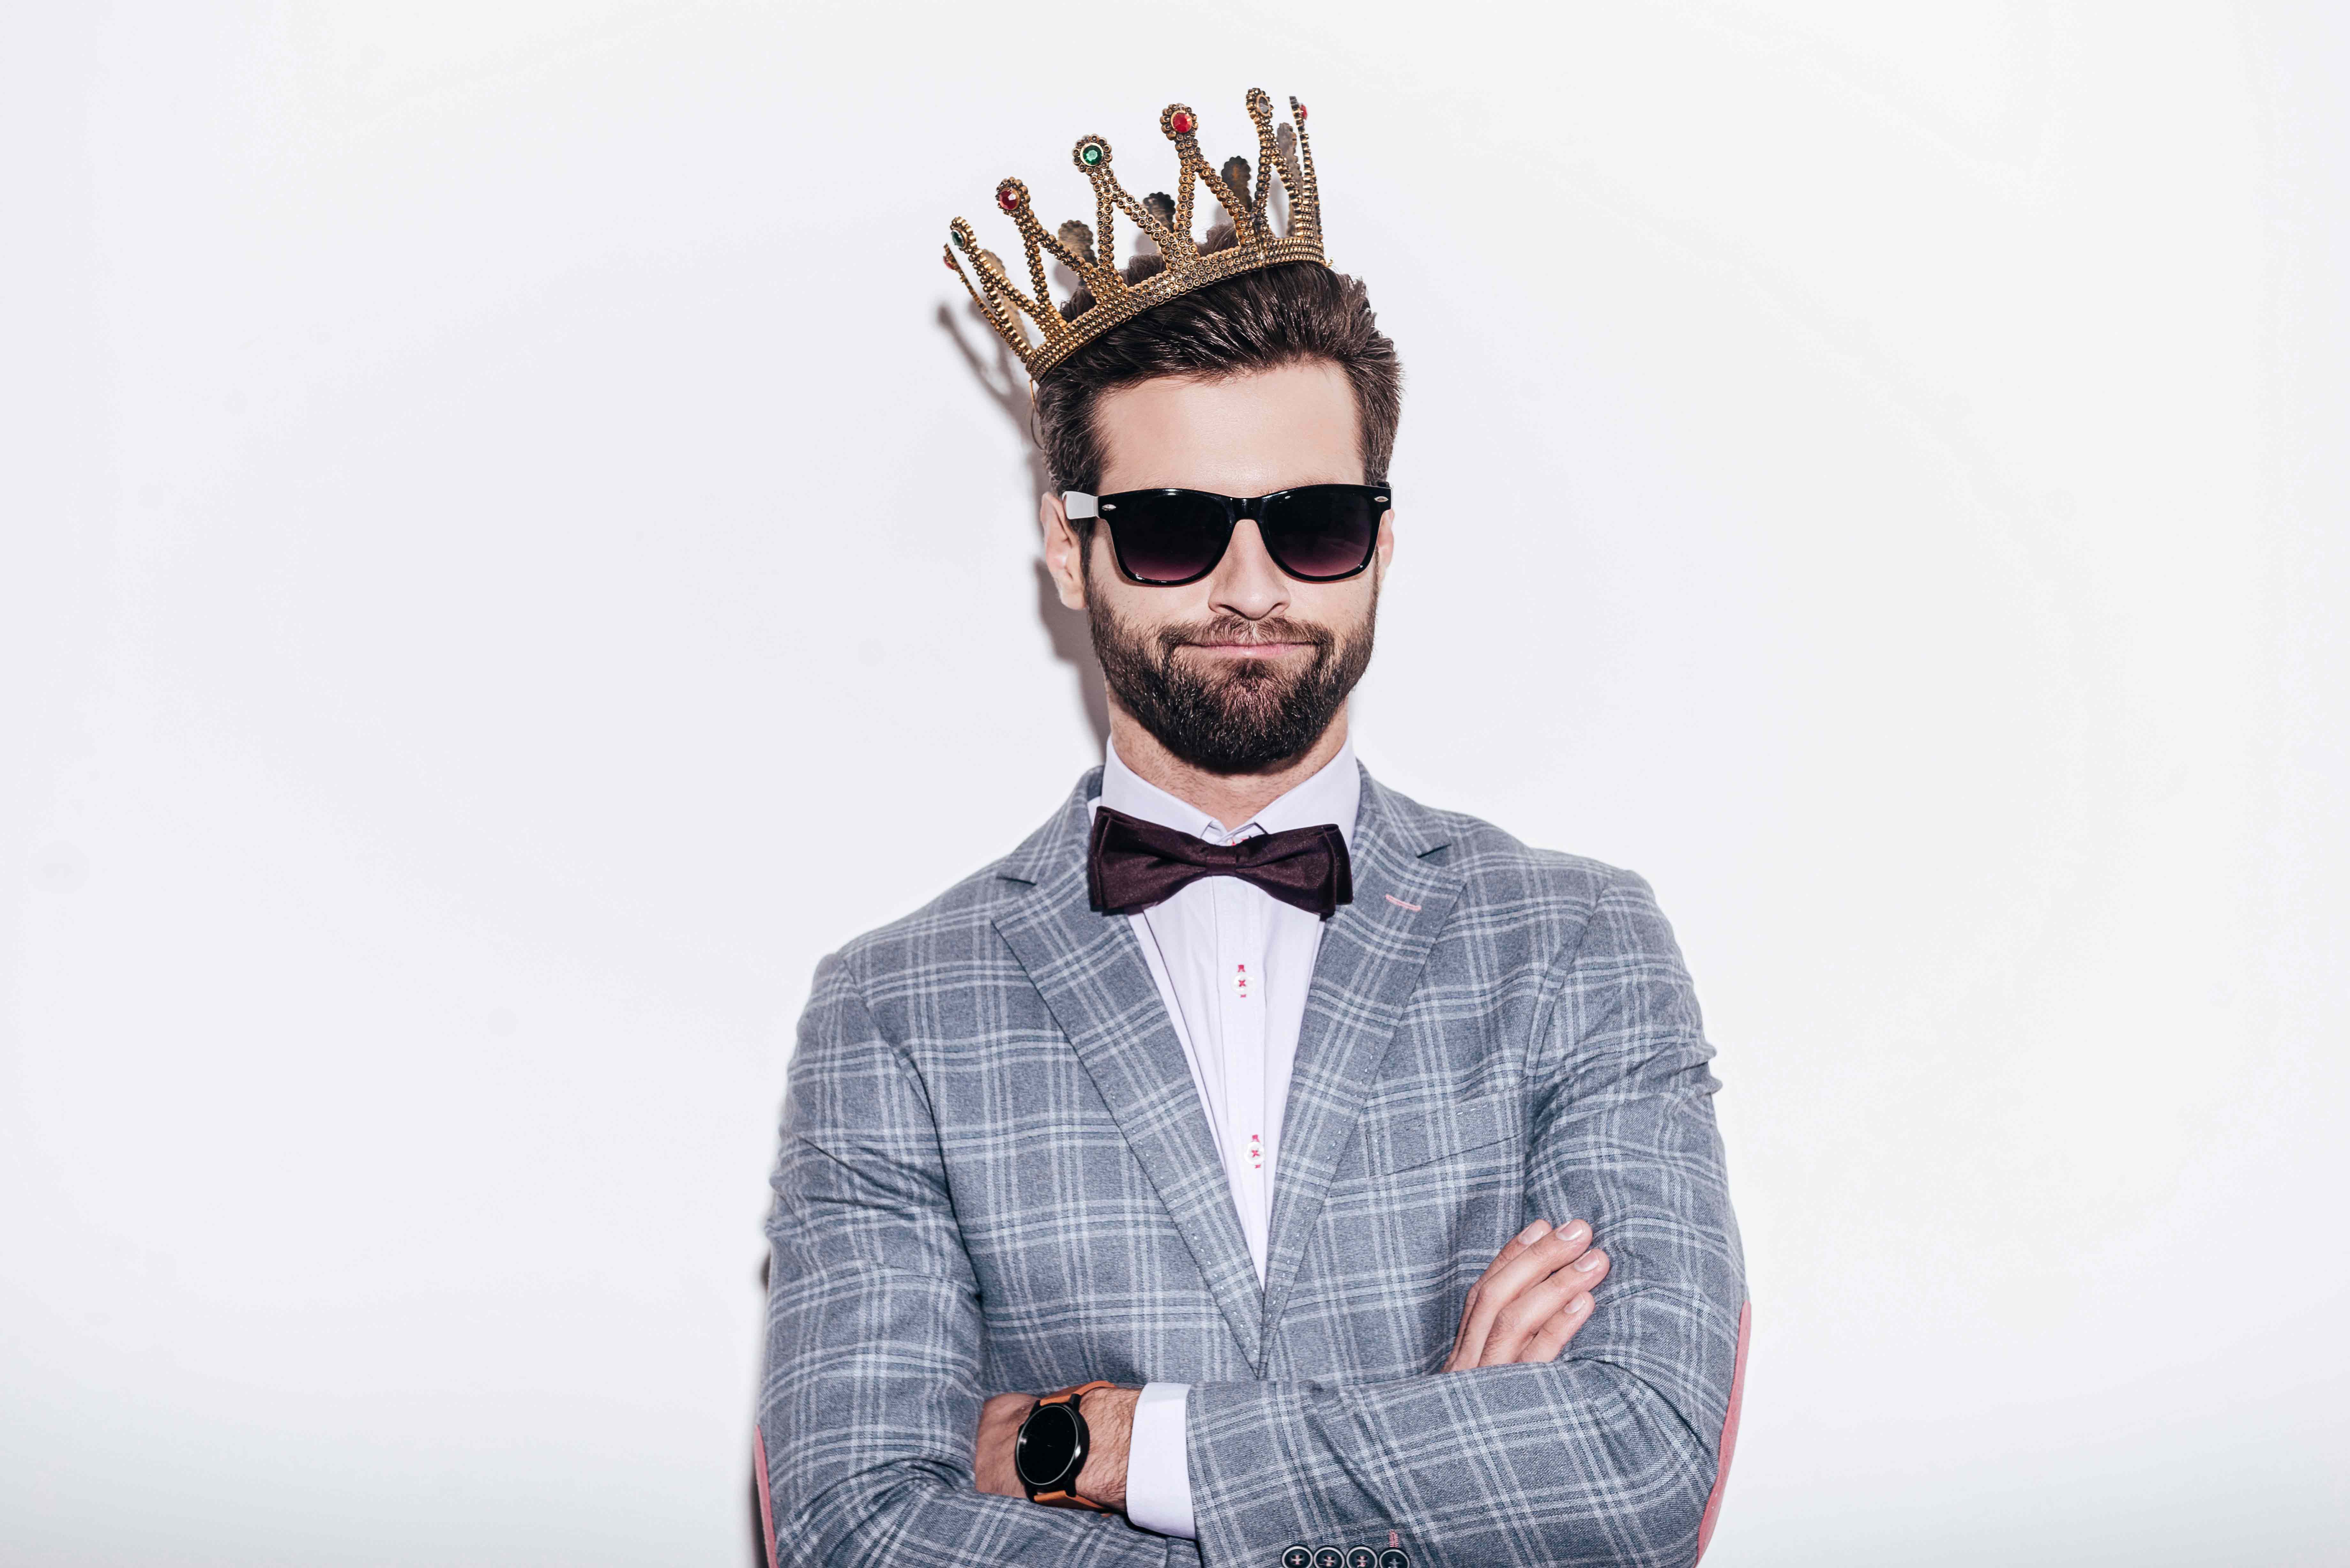 5 Reasons Why the Customer is King